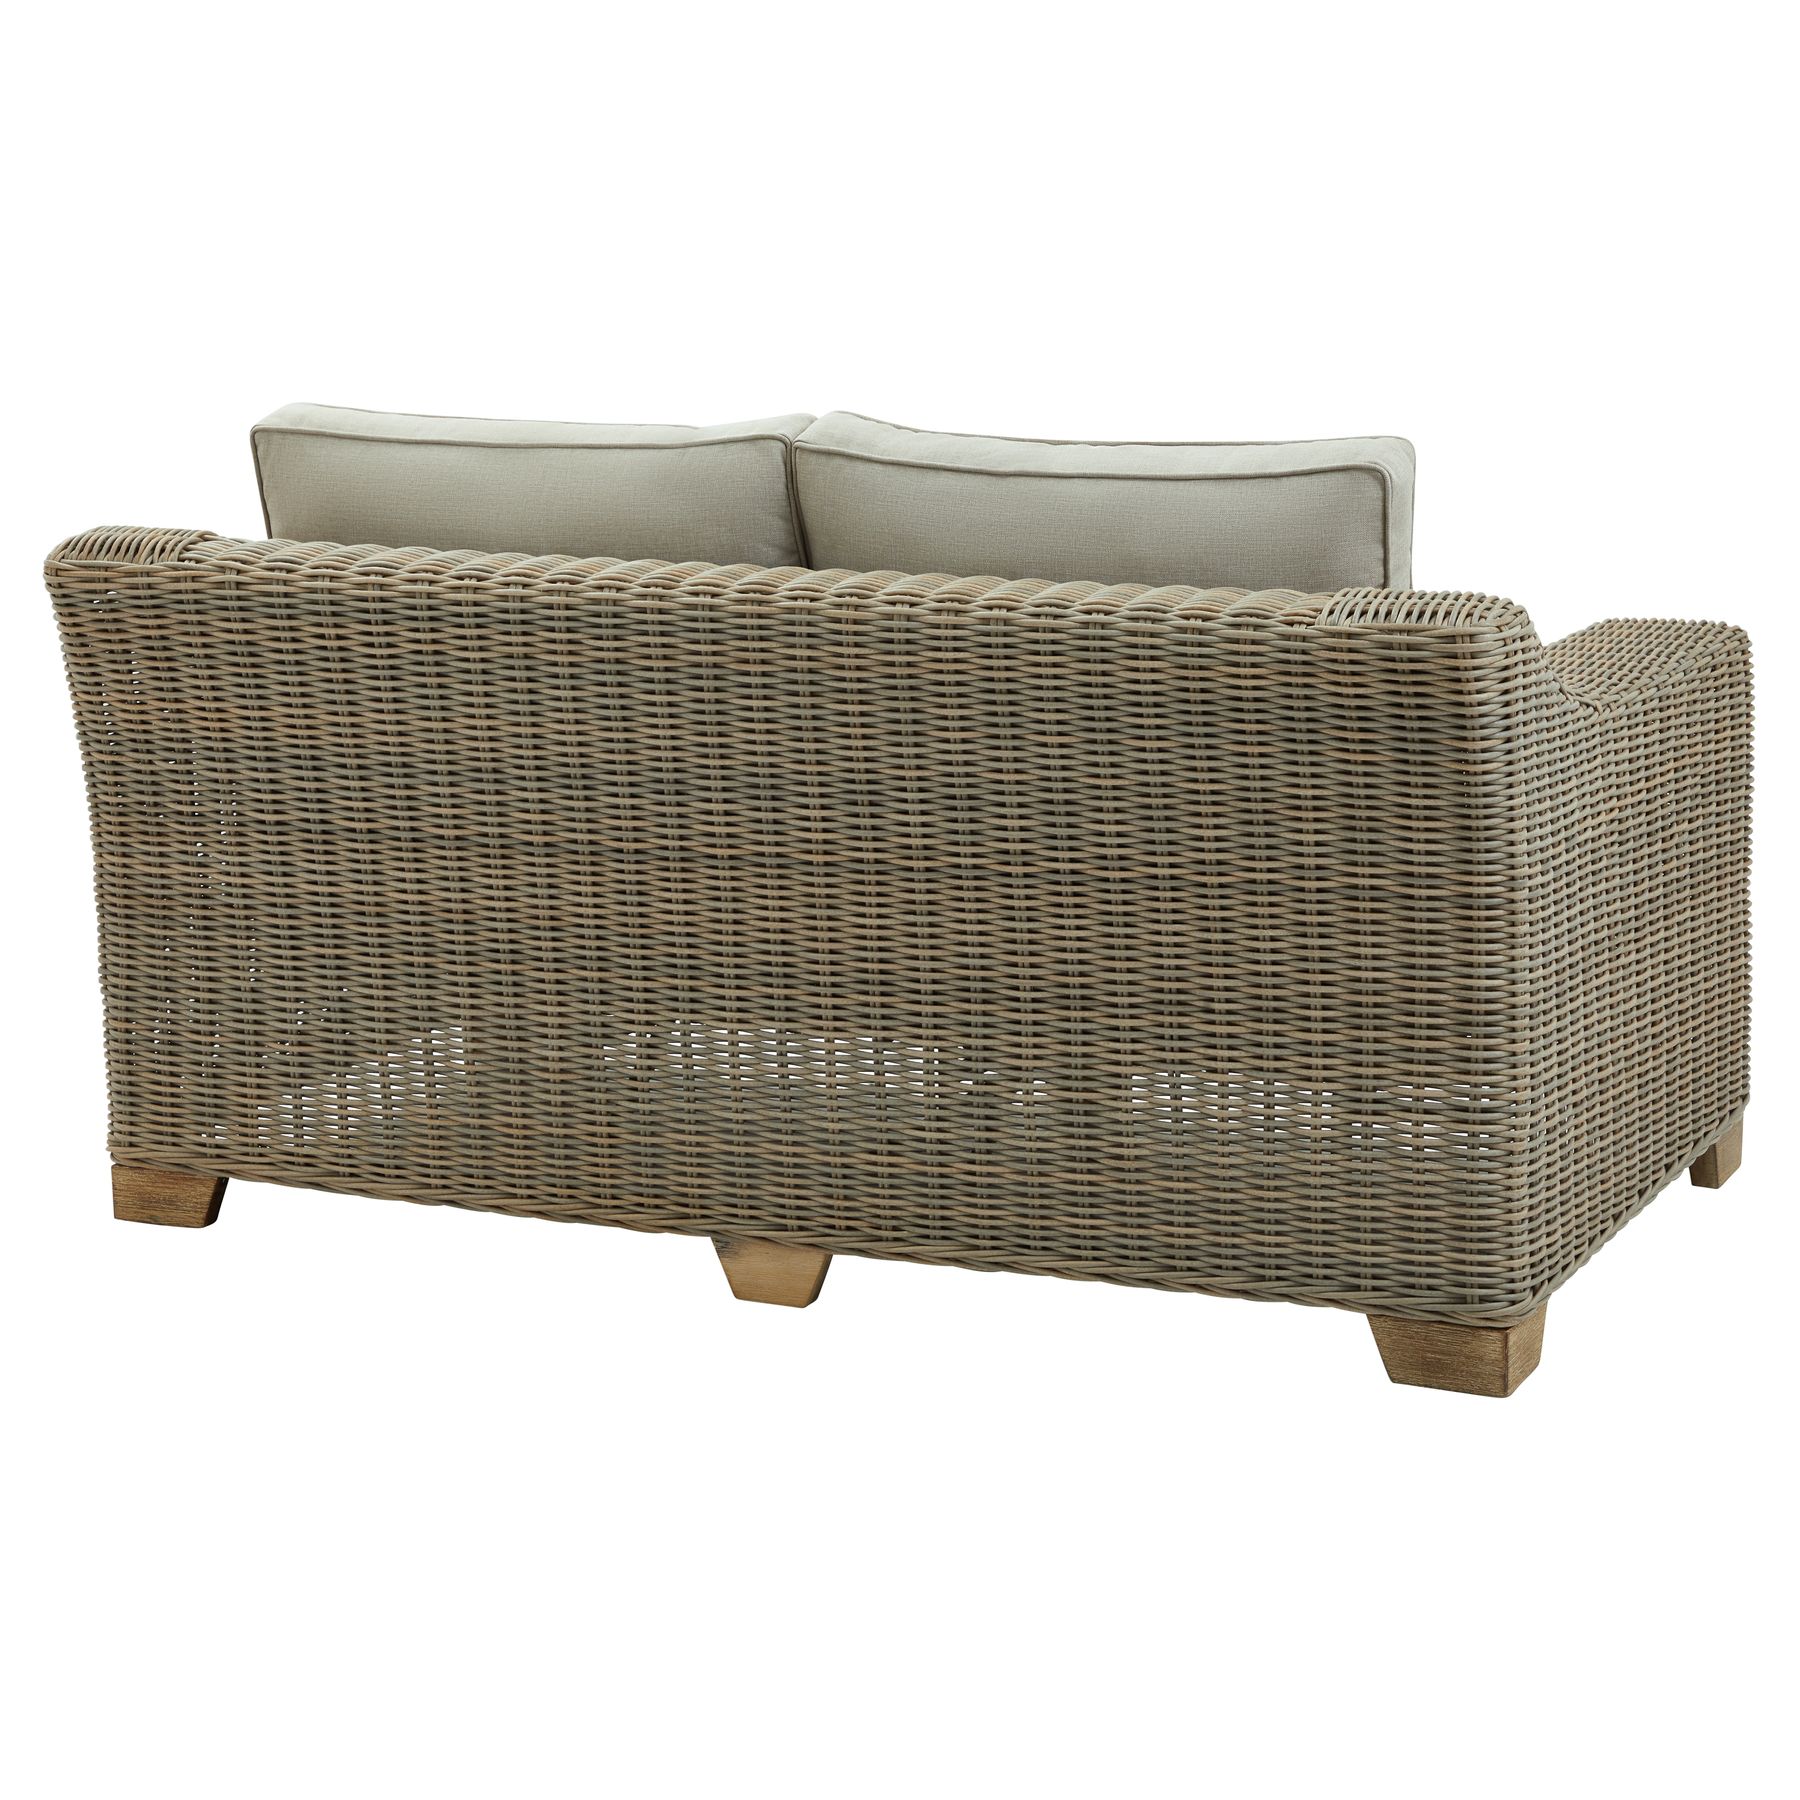 Capri Collection Outdoor Two Seater Sofa - Image 4